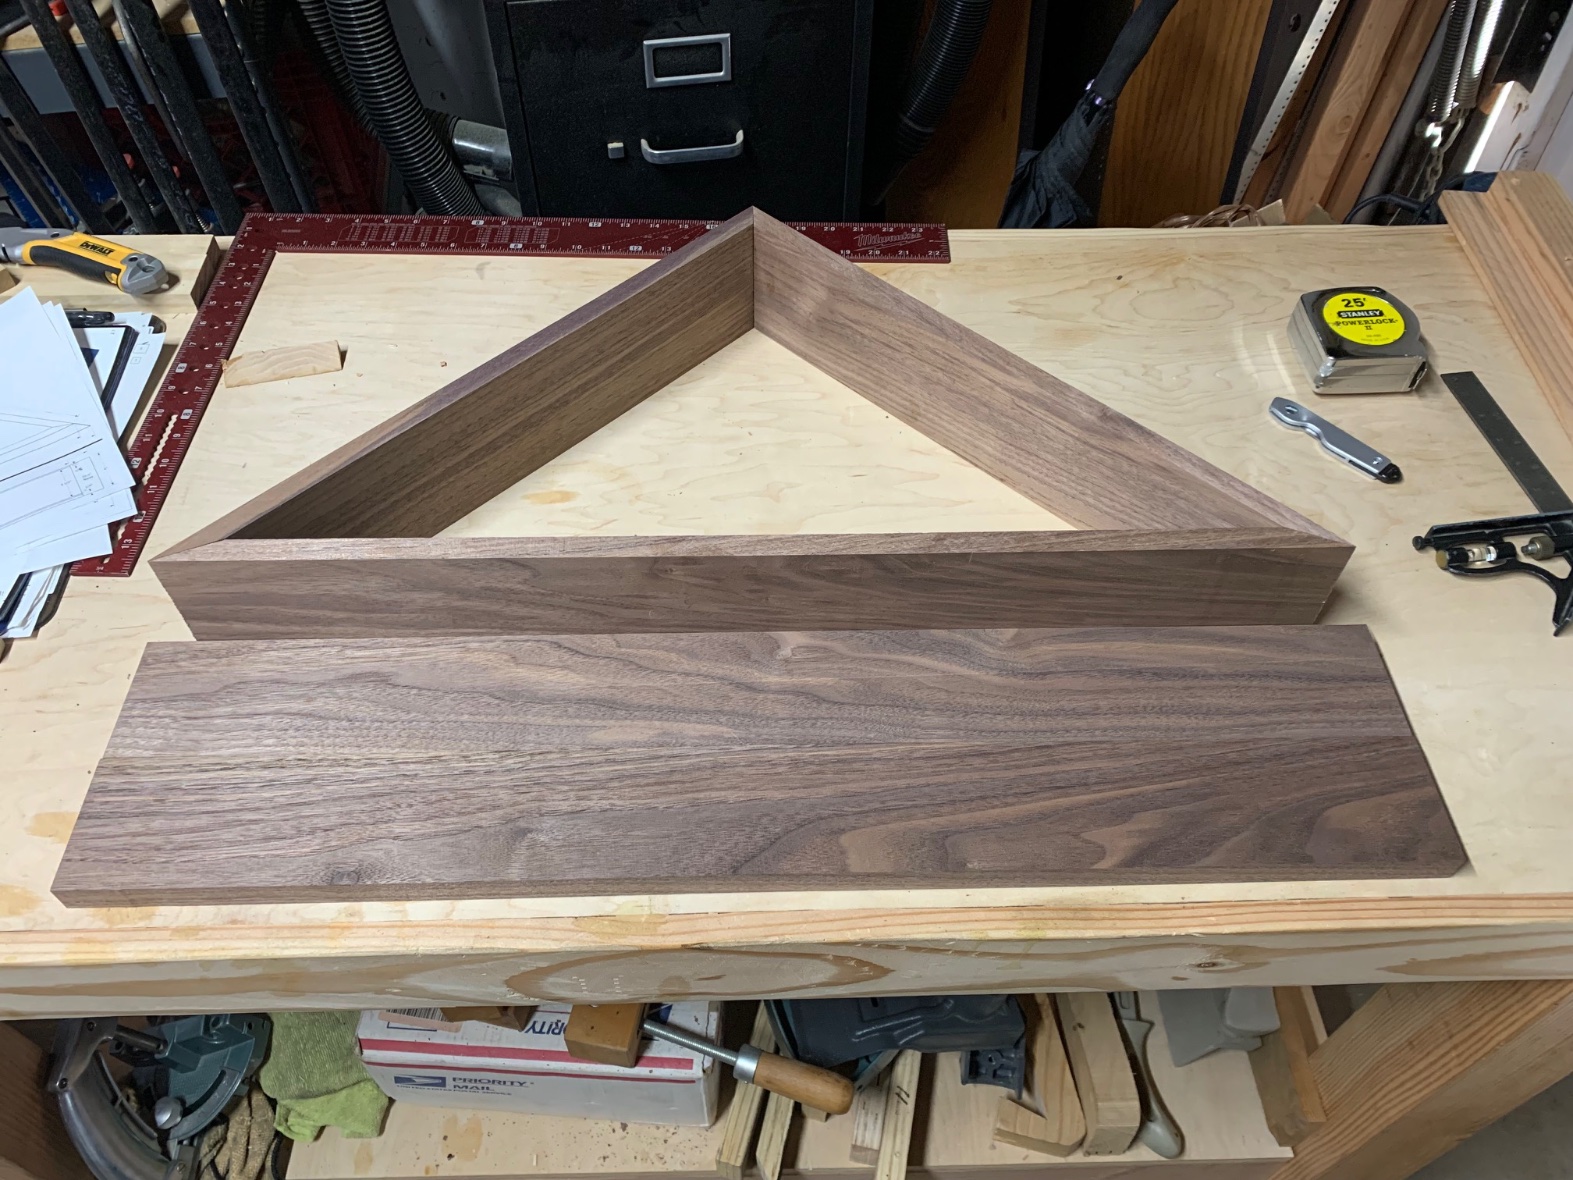 Lower angle to better see the wood grain